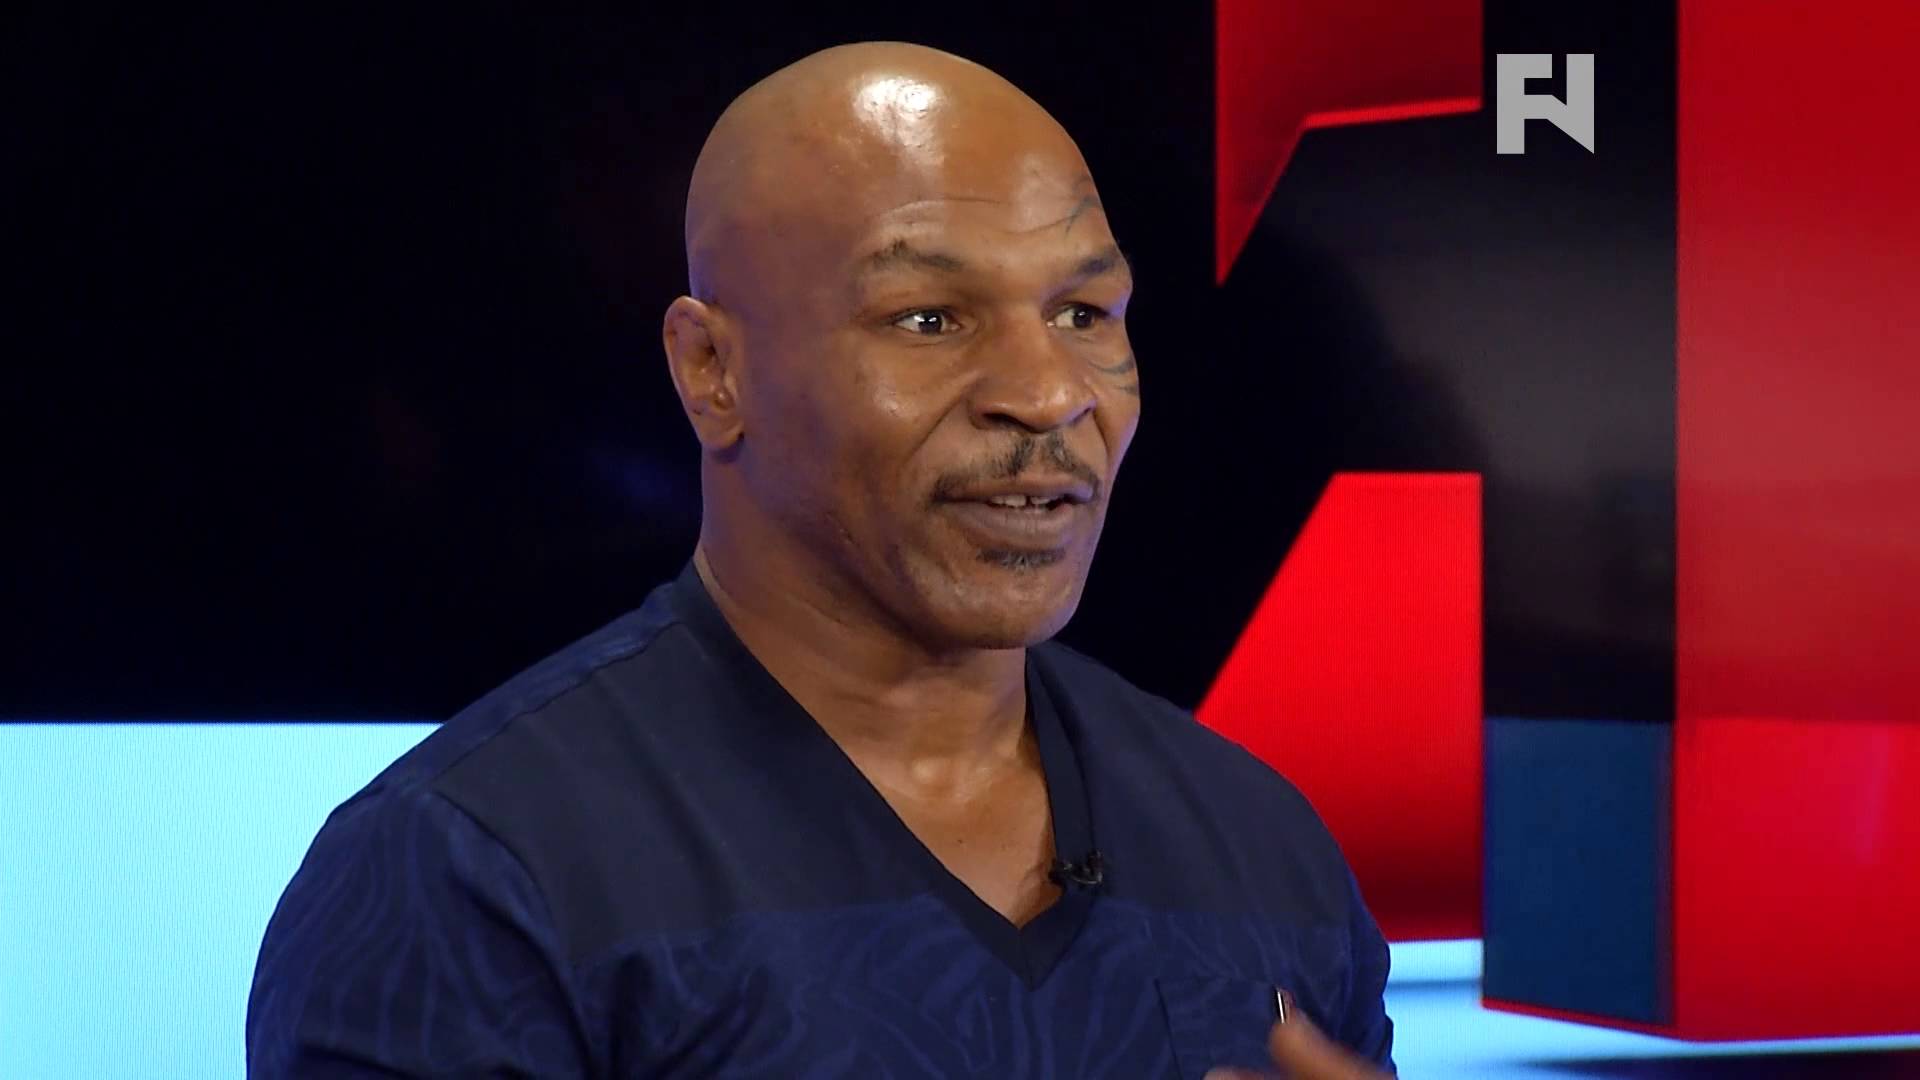 Video - The Fight Network Interview 'Iron' Mike Tyson